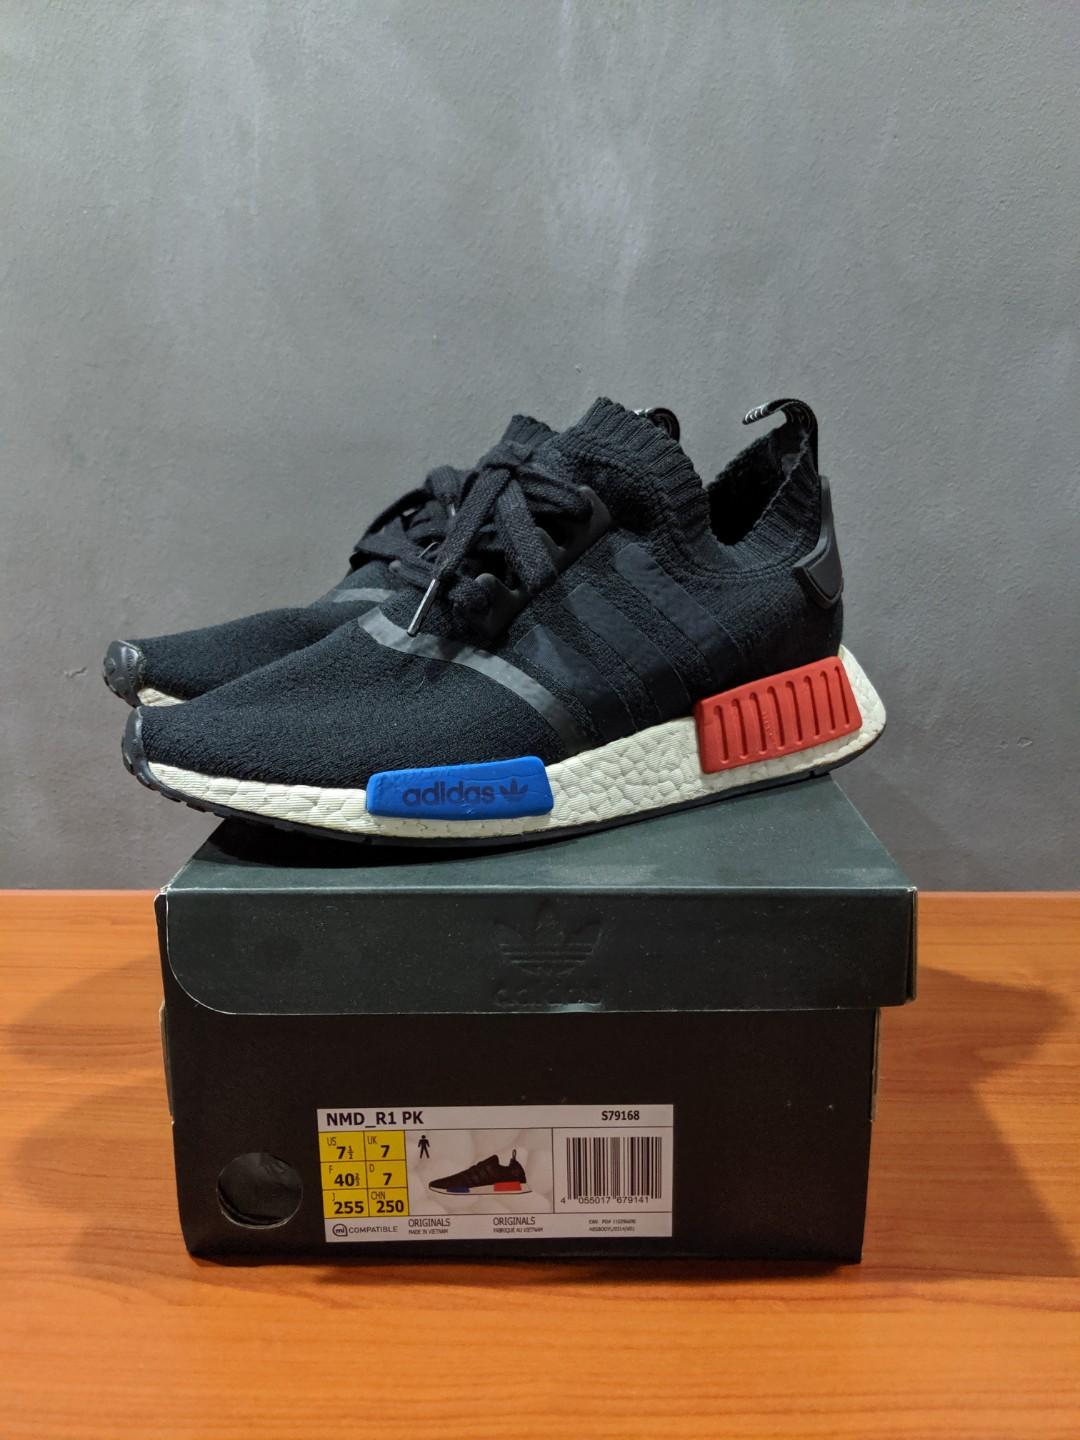 Adidas NMD R1 OG PK US 7.5, Men's Fashion, Footwear, Sneakers on Carousell